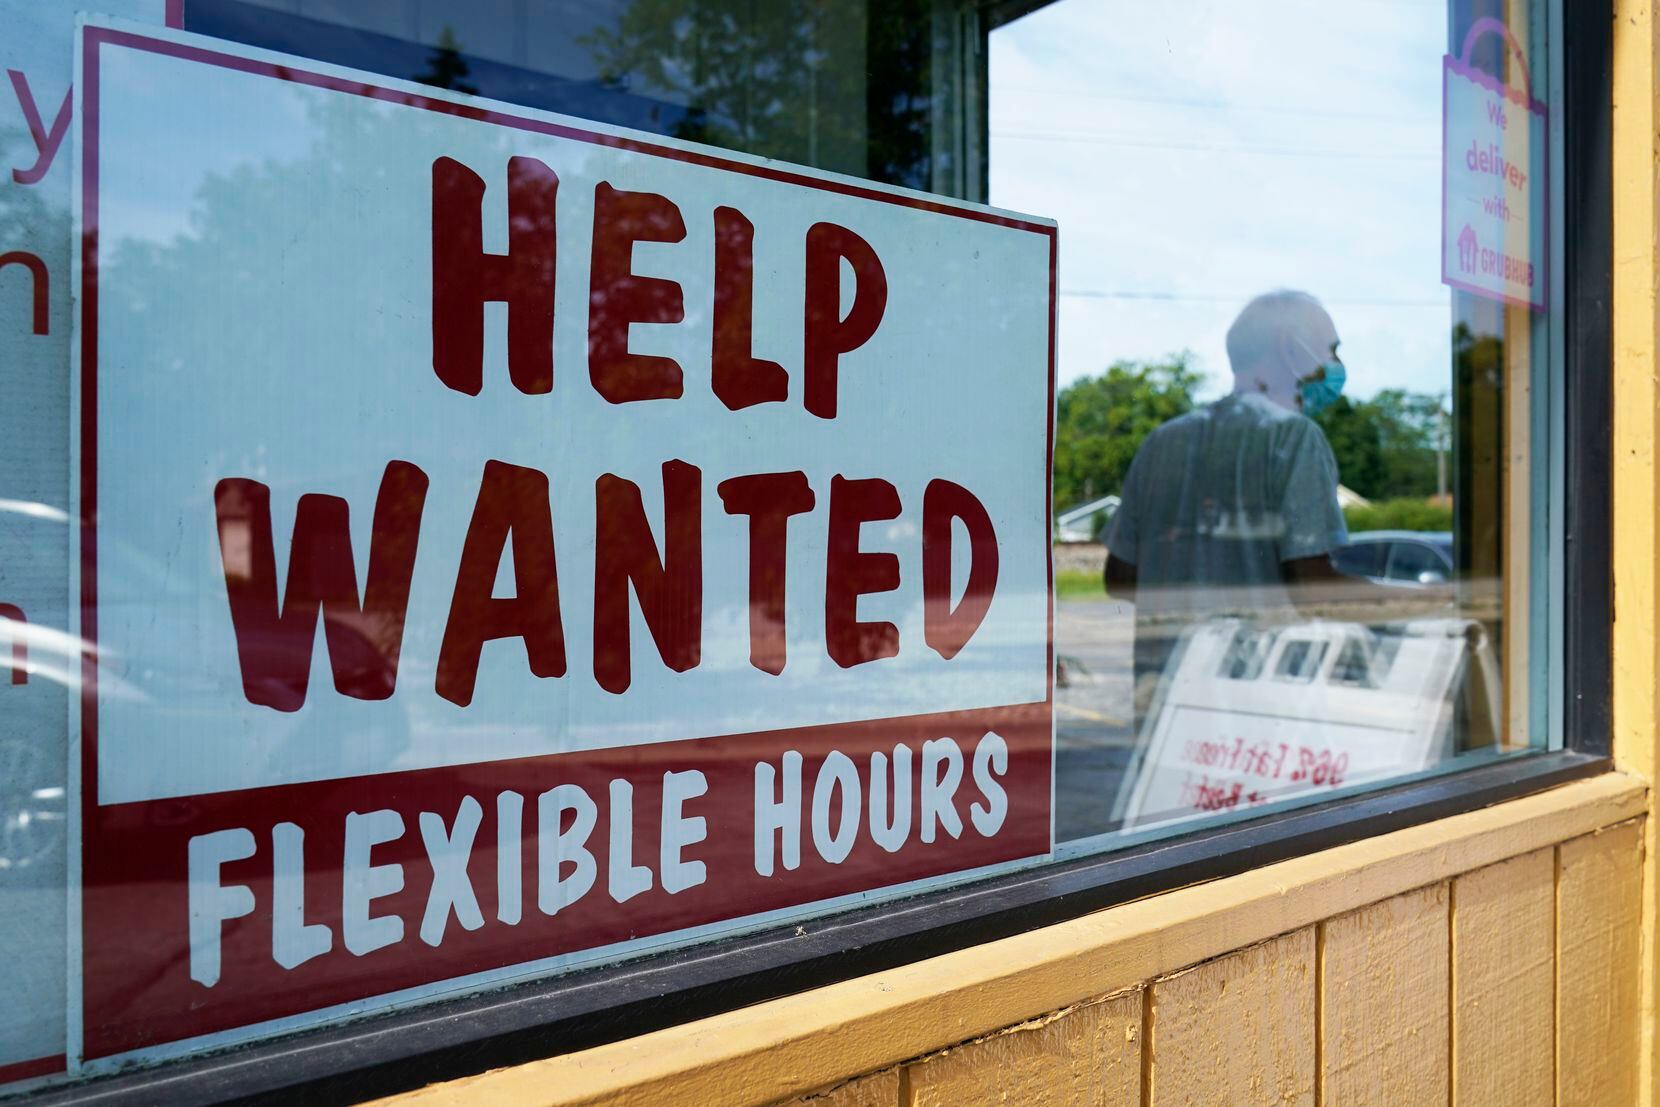 Losing a job isn’t fun, but many employers are still looking to fill open positions.